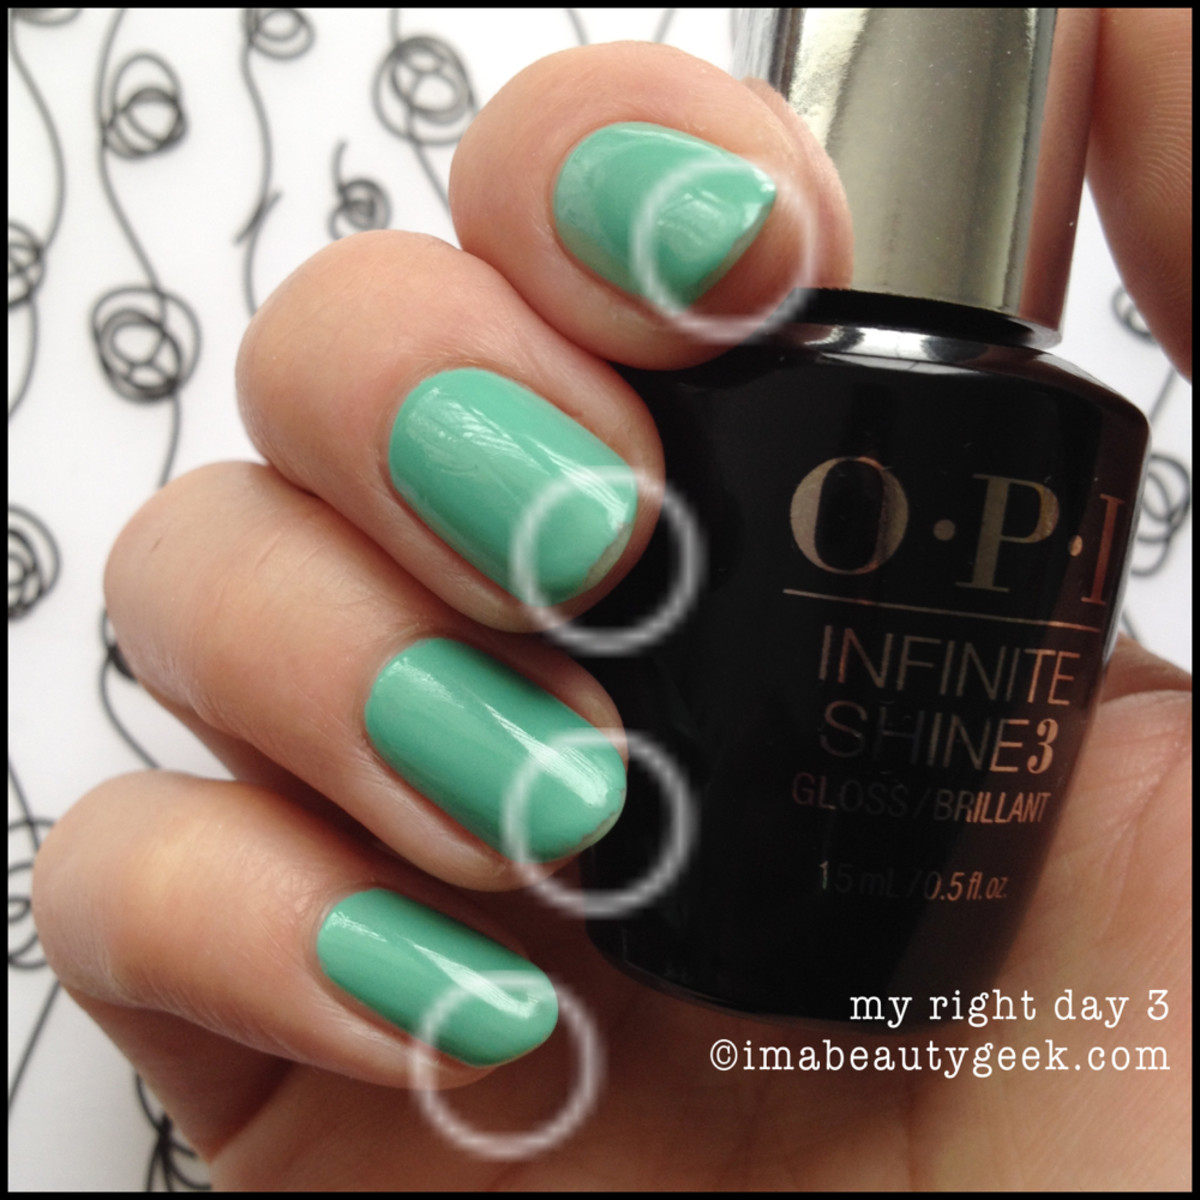 OPI Infinite Shine Review Withstands the Test of Thyme